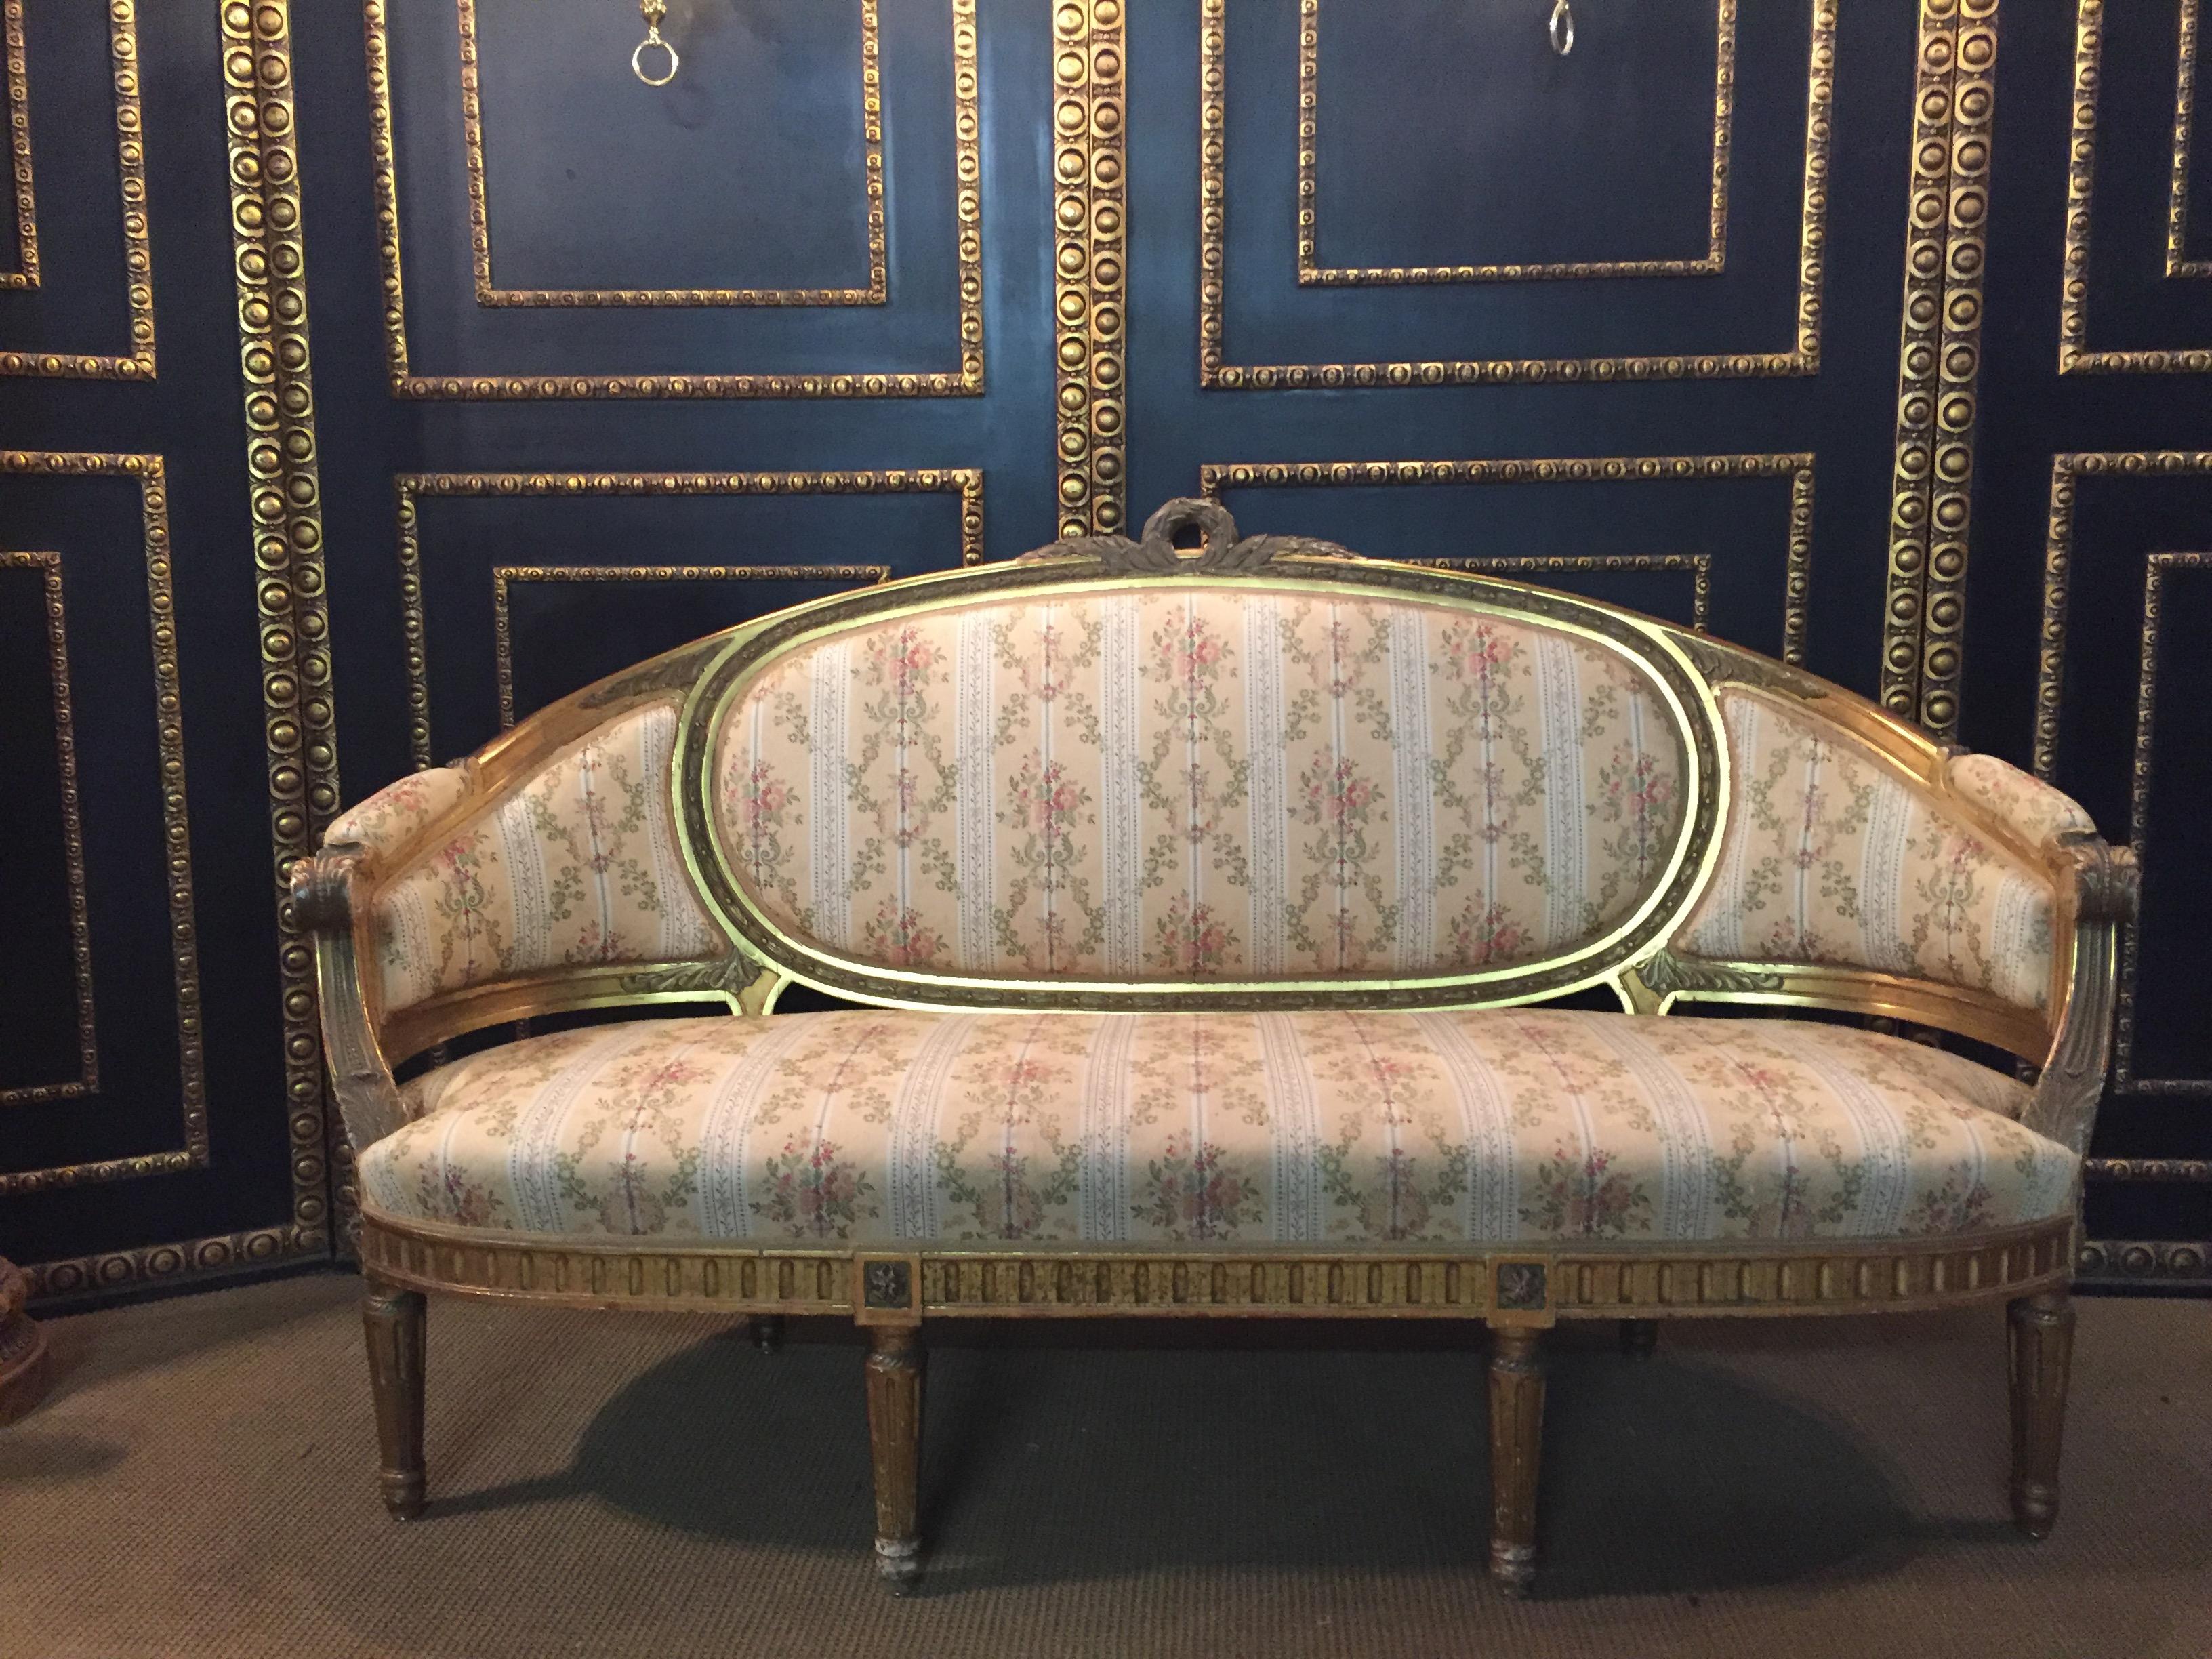 Solid beech wood, finely carved, poliment gilded and partial sheet gilded. Cambered and carved frame on carved, tapering legs. Curved armrests. Flanked by relieved leaf rosettes. Rising armrests in medallion-shaped back frame with carved crown